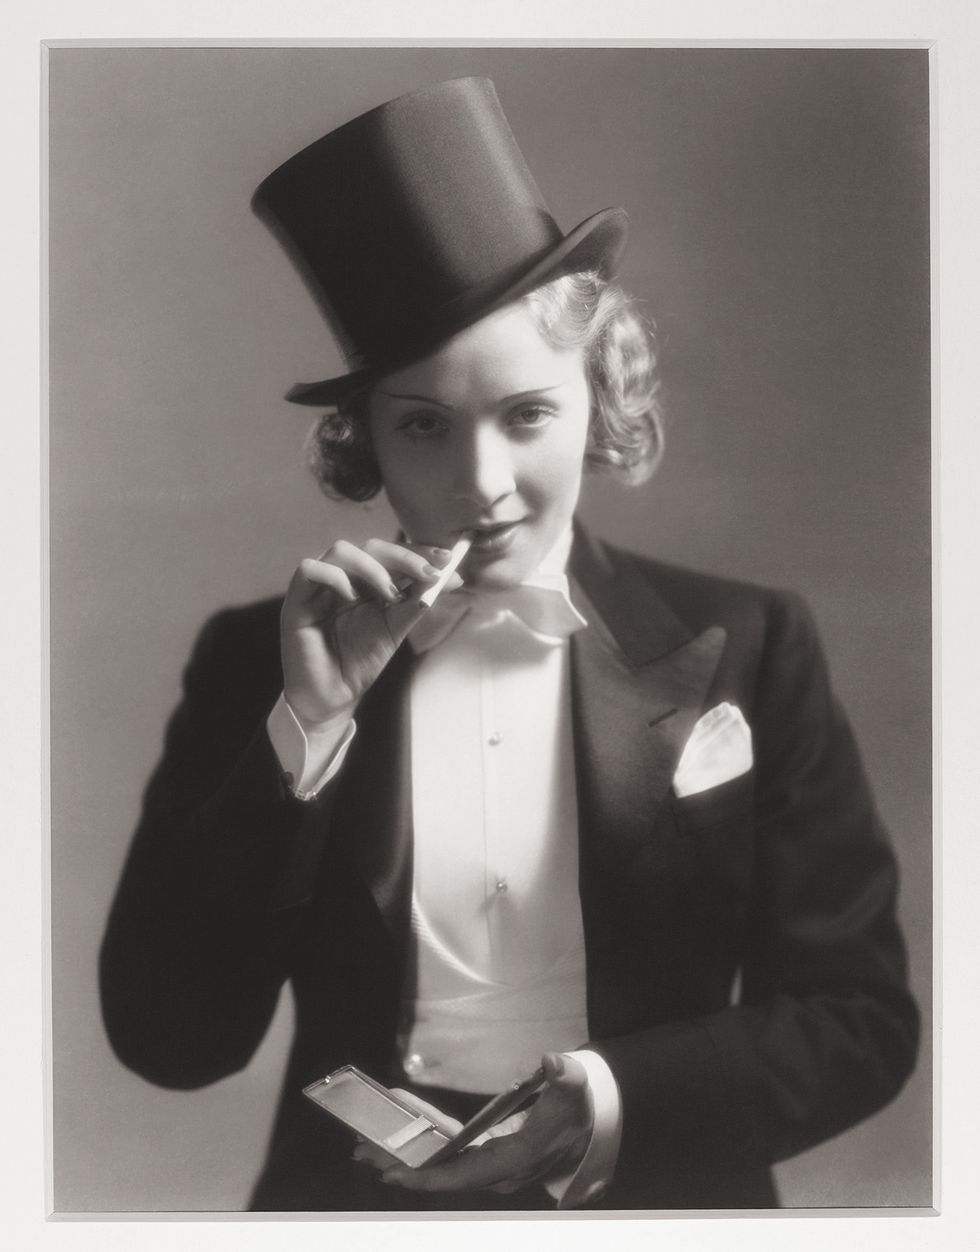 marlene dietrich, photography, eugene robert richee, morocco, the international center of photography, icp, new york, play the part, collection pierre passebon